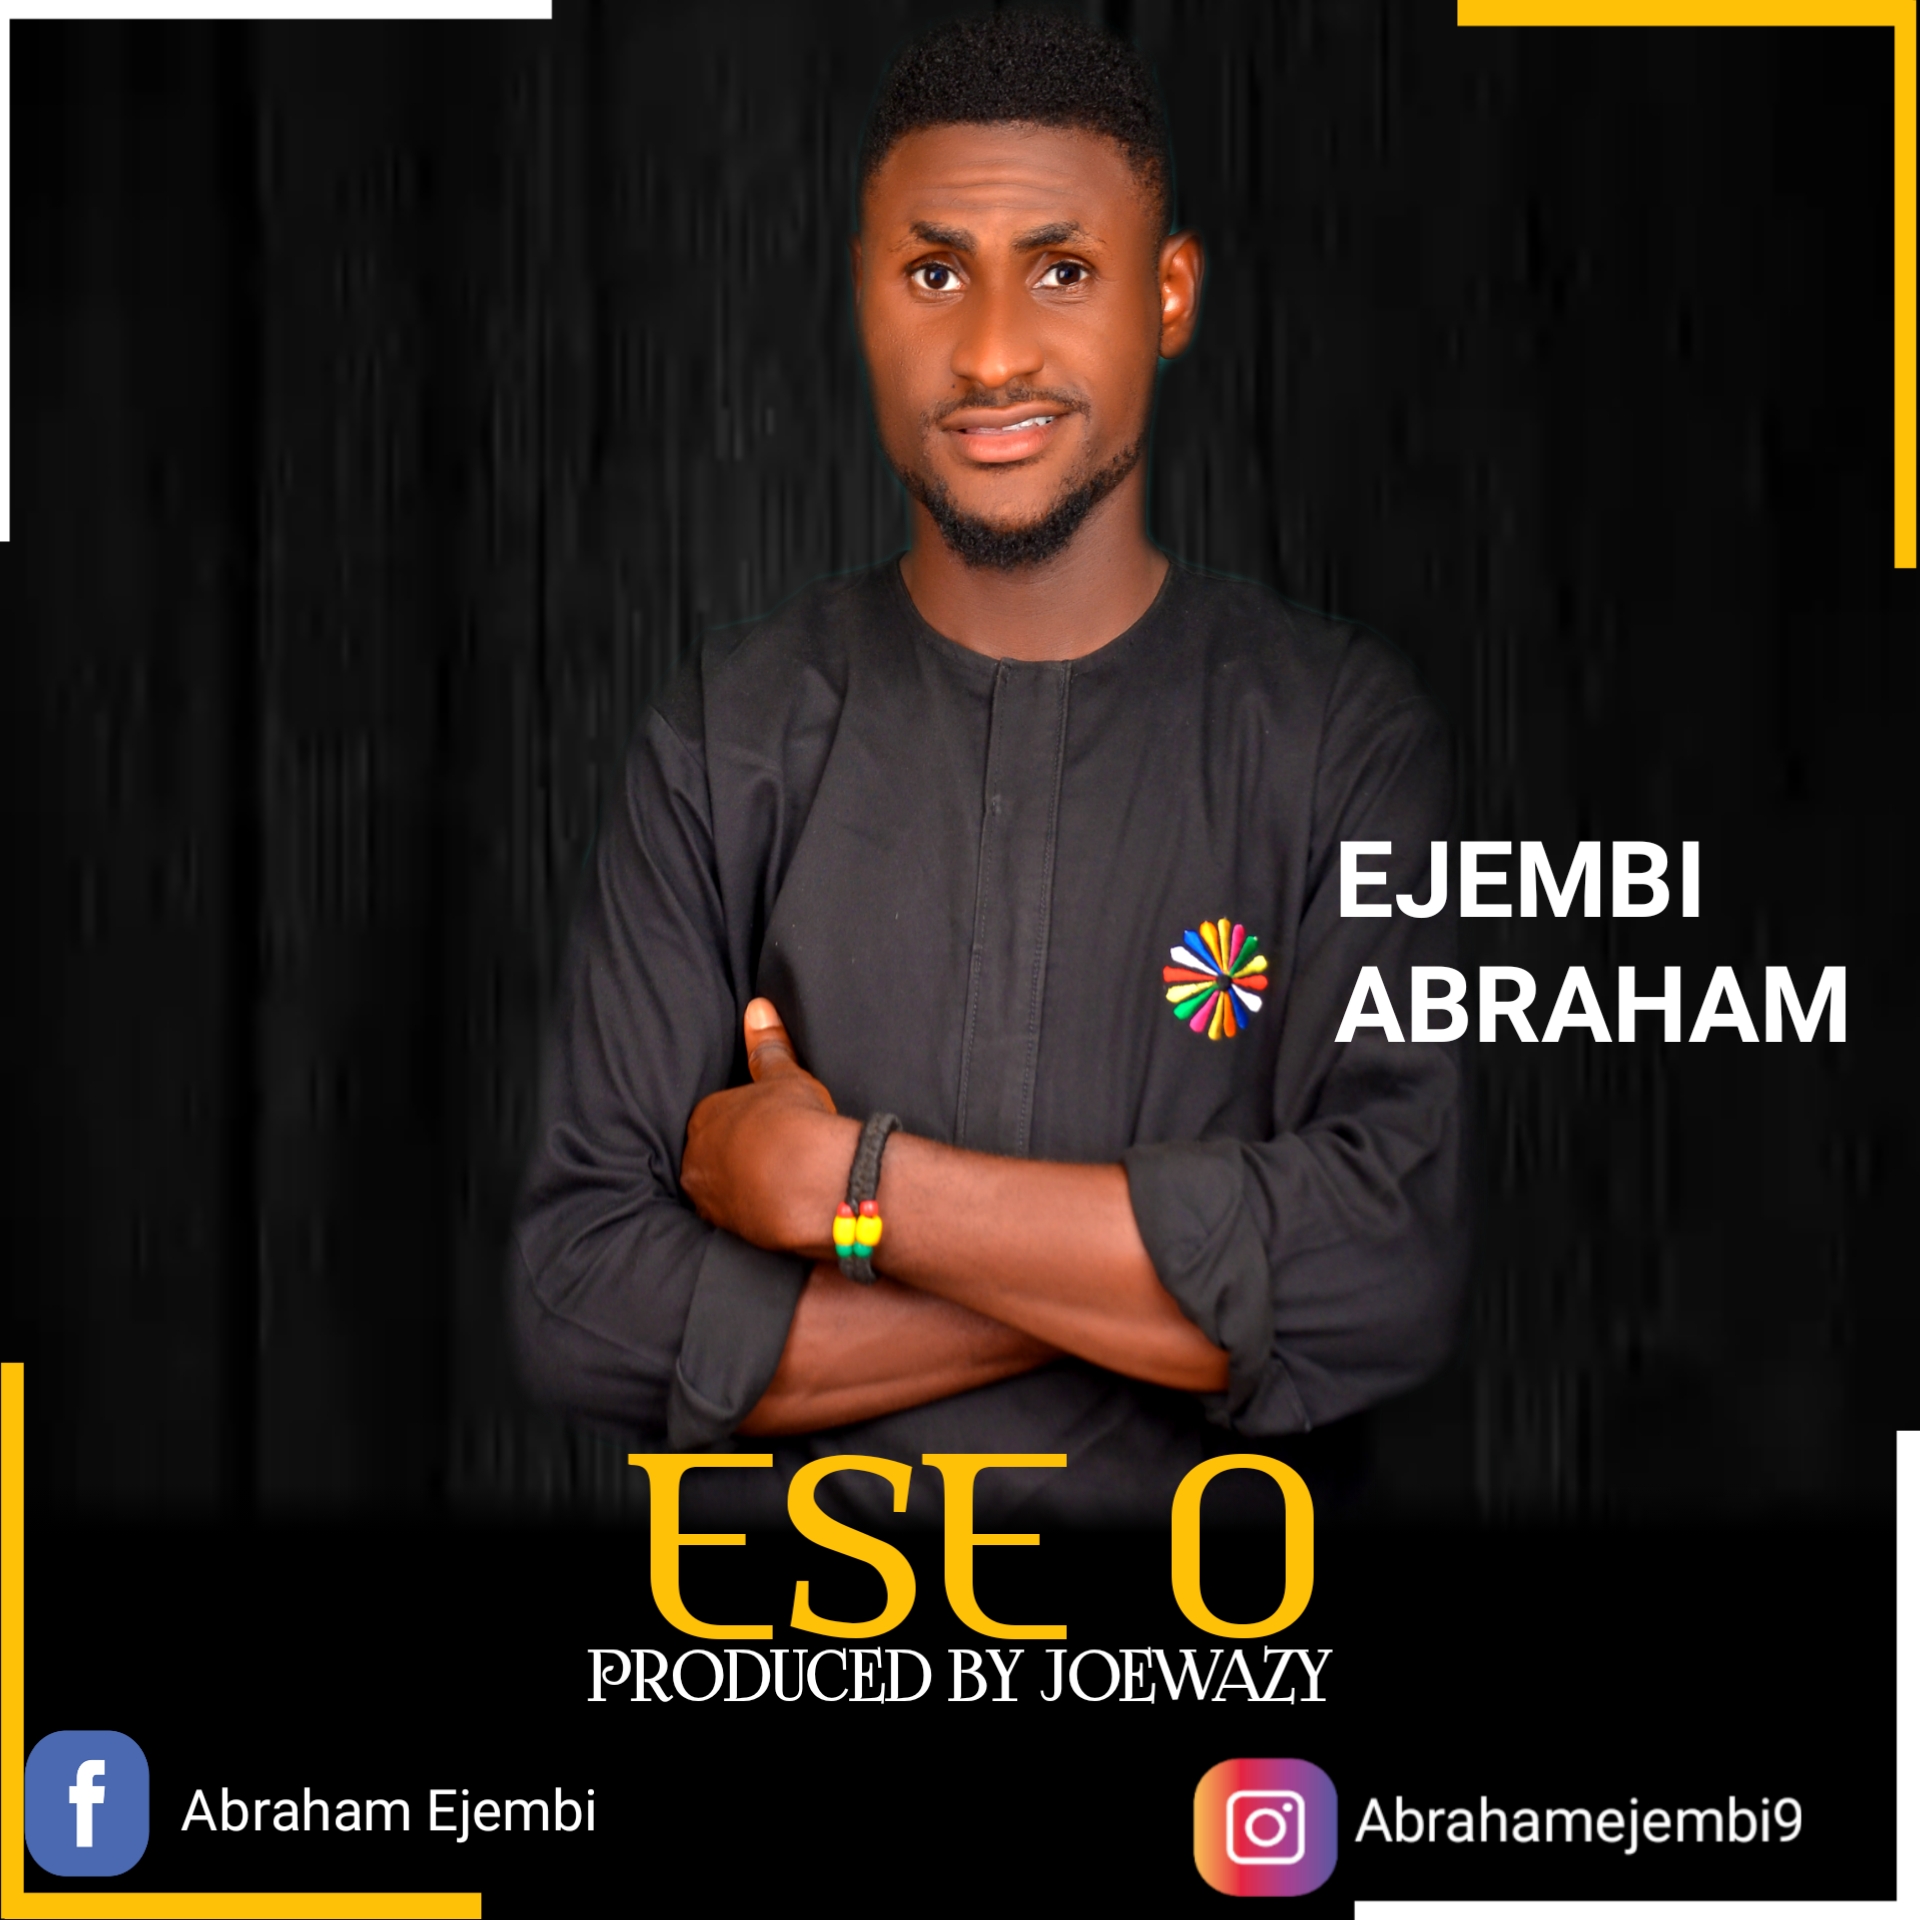 [New Release] Download ESE O by EJEMBI ABRAHAM 21